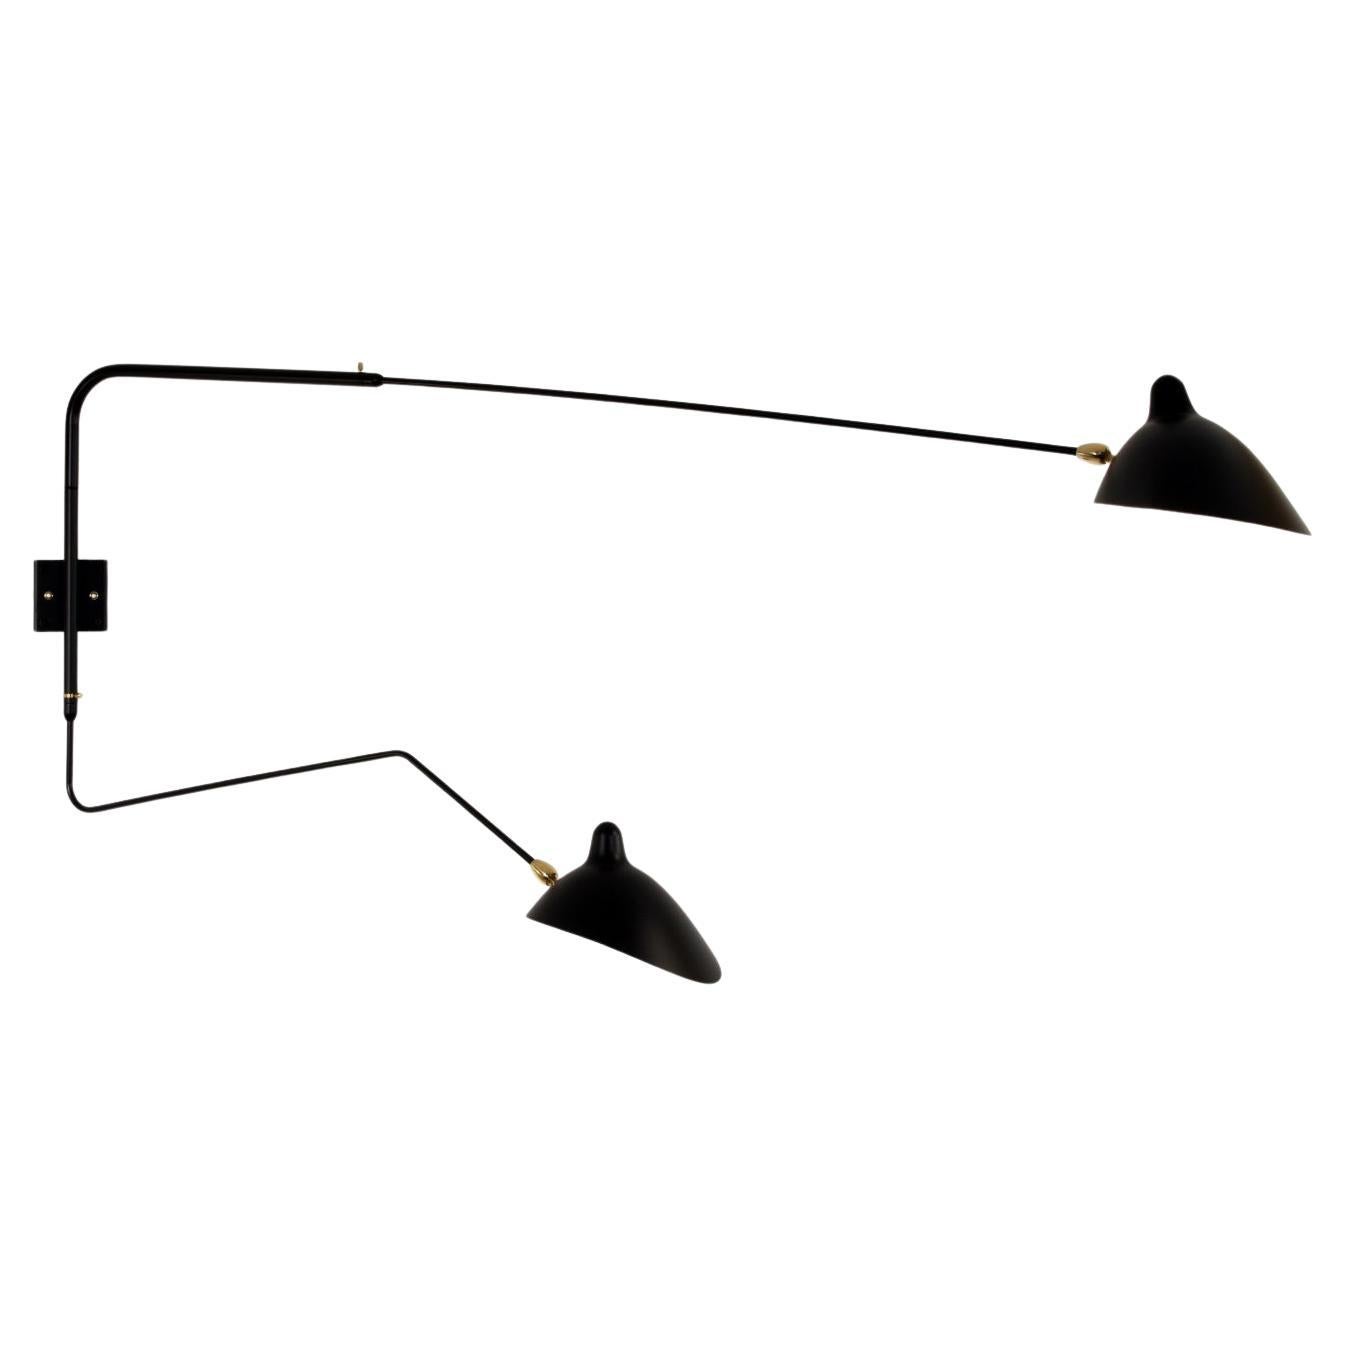 Serge Mouille - Rotating Sconce with 2 Arms (1 Curved) in Black For Sale